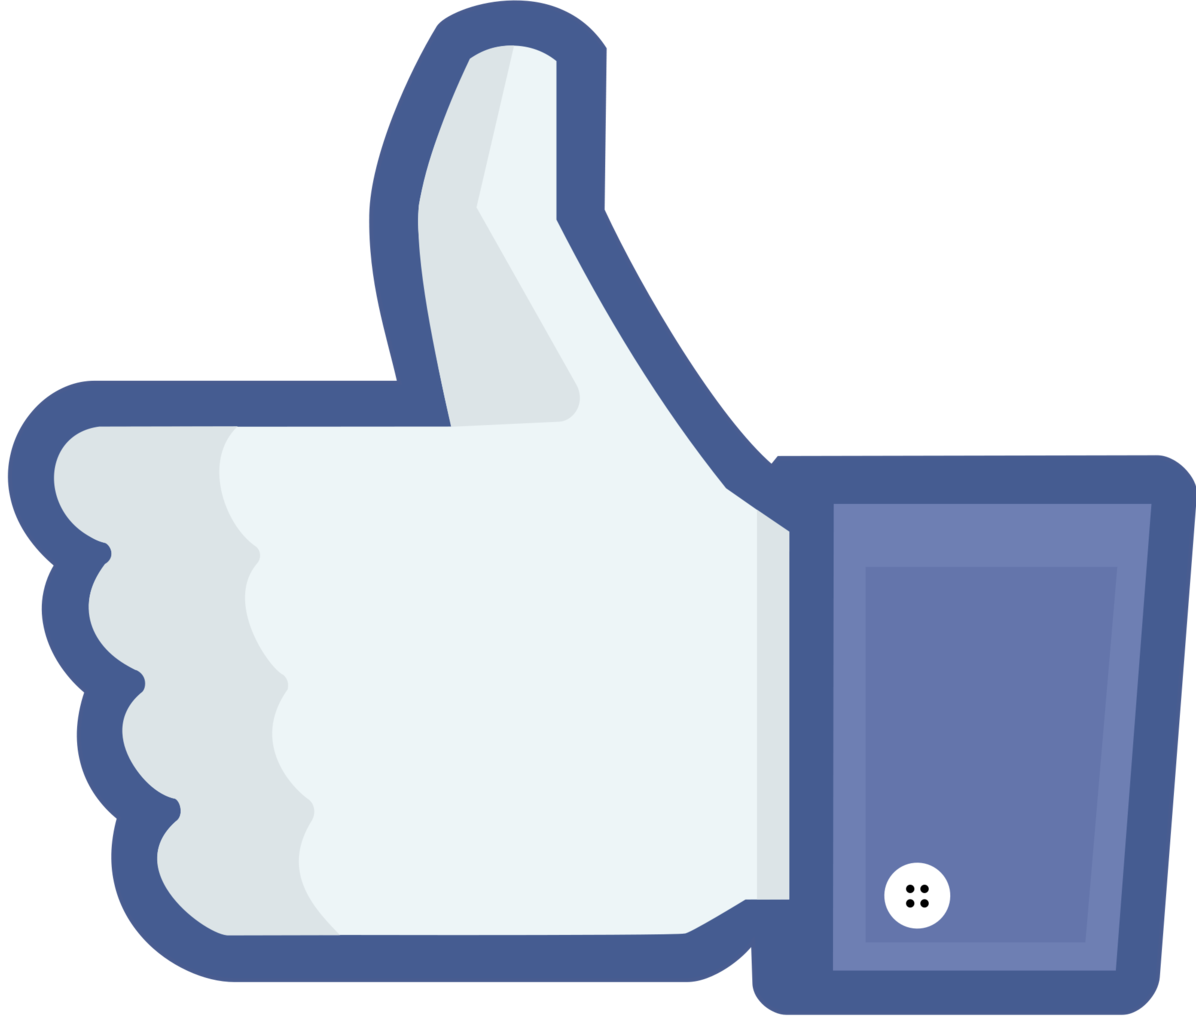 Facebook Like Button Social Media Advertising Thumbs Up Png Download